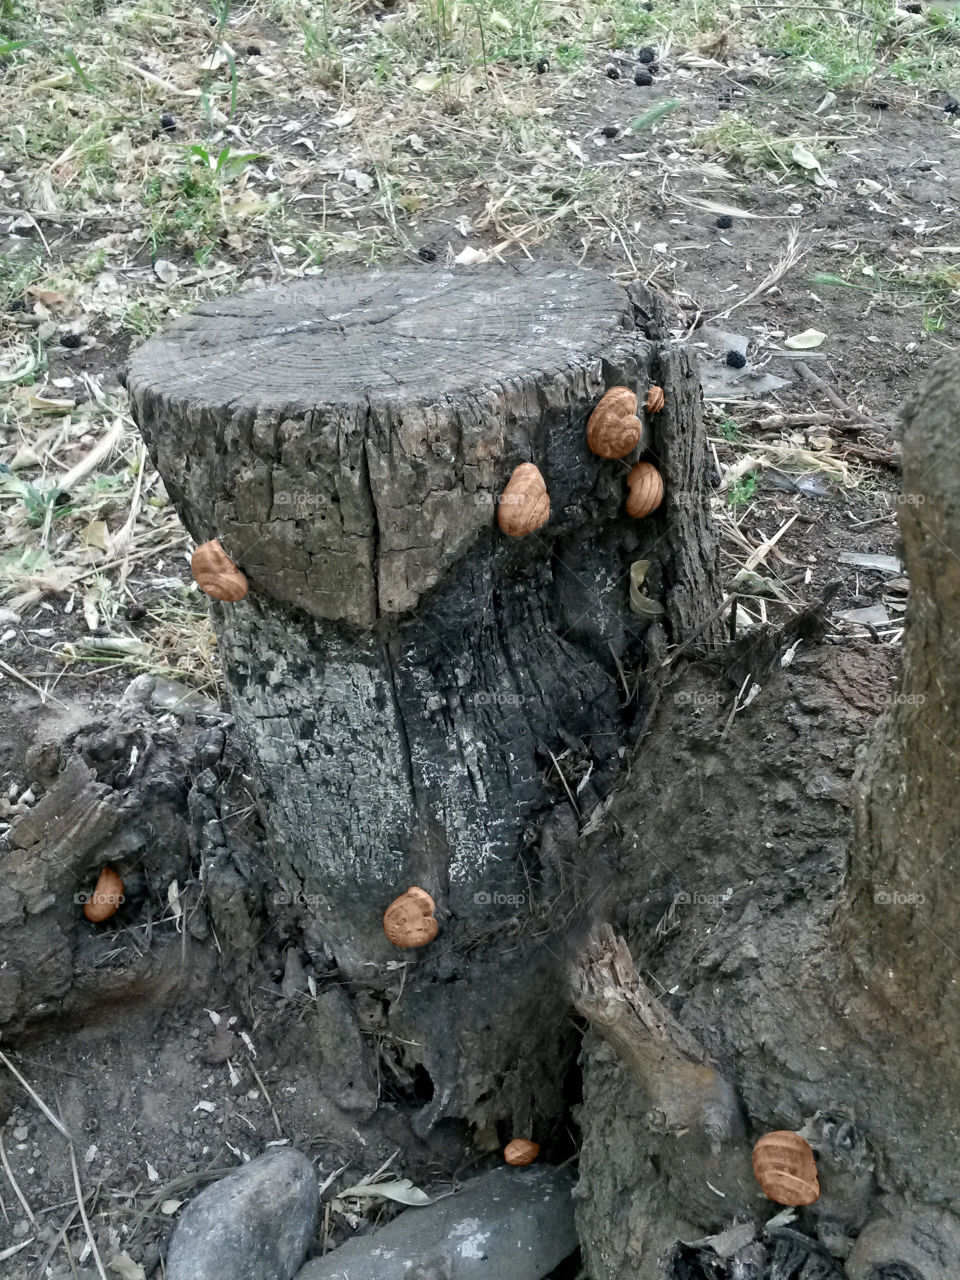 Snails on the old stump